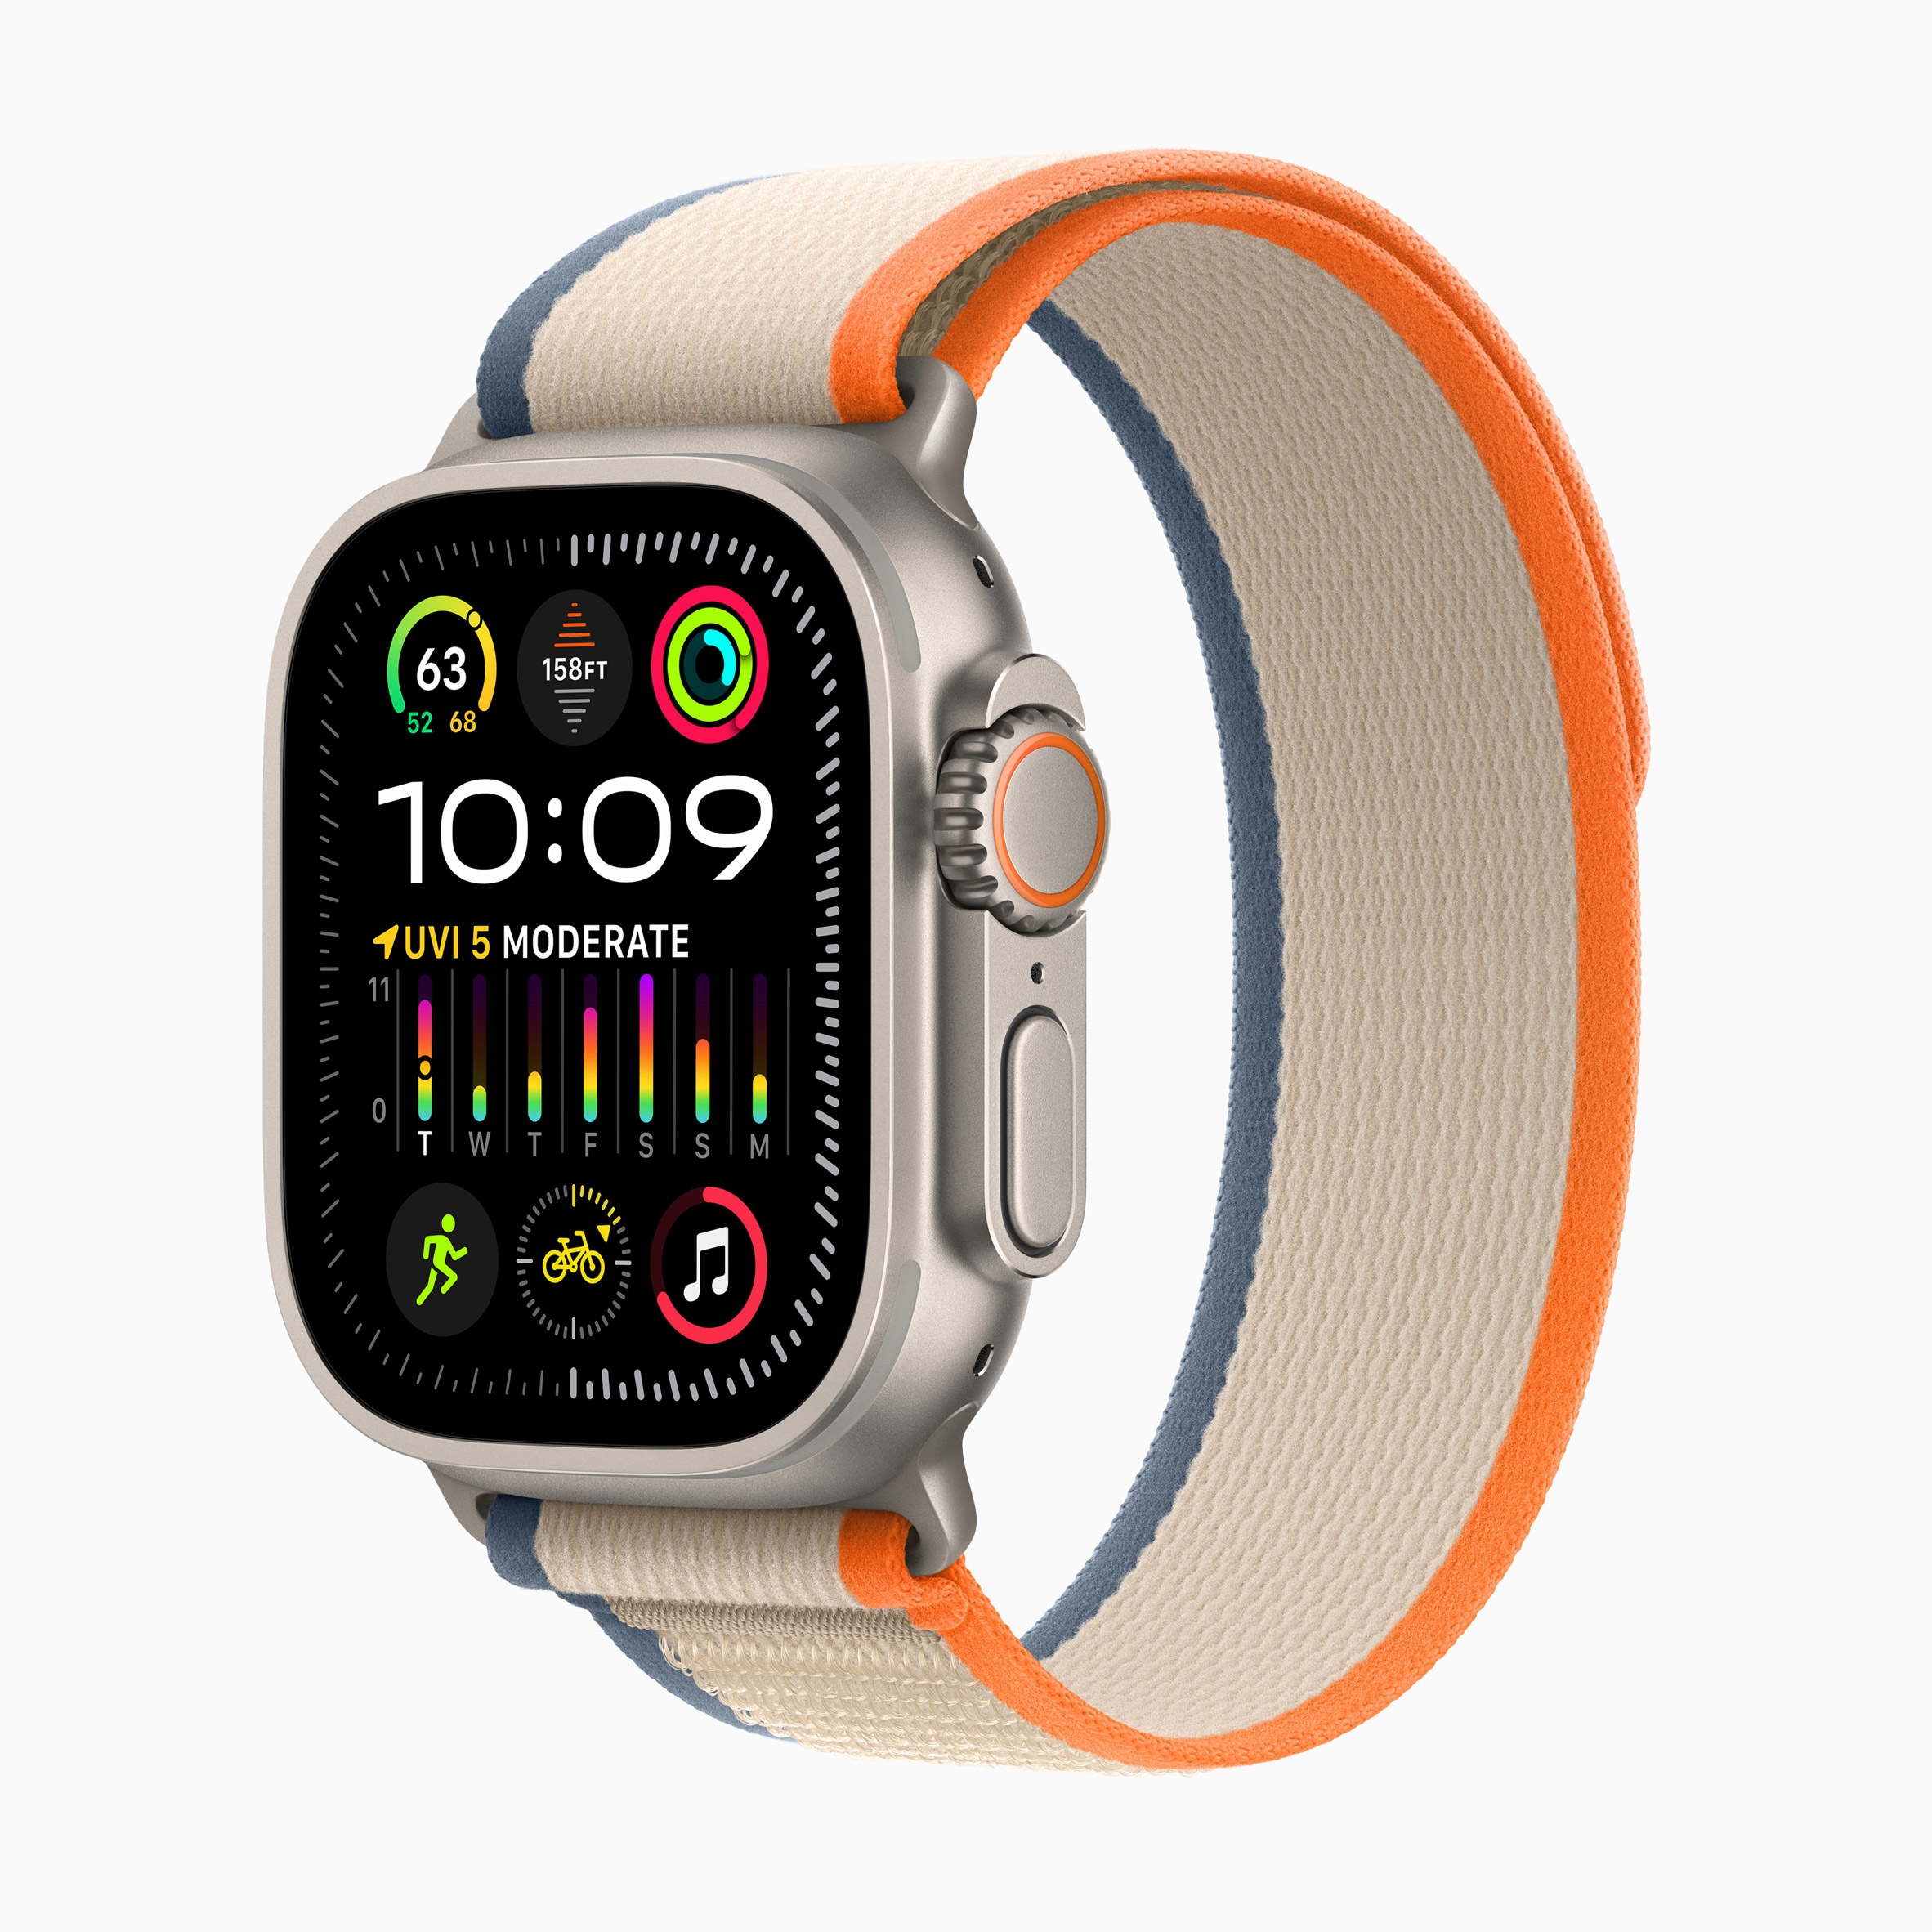 Apple Watch Ultra 2 when paired with the new Trail Loop is carbon neutral